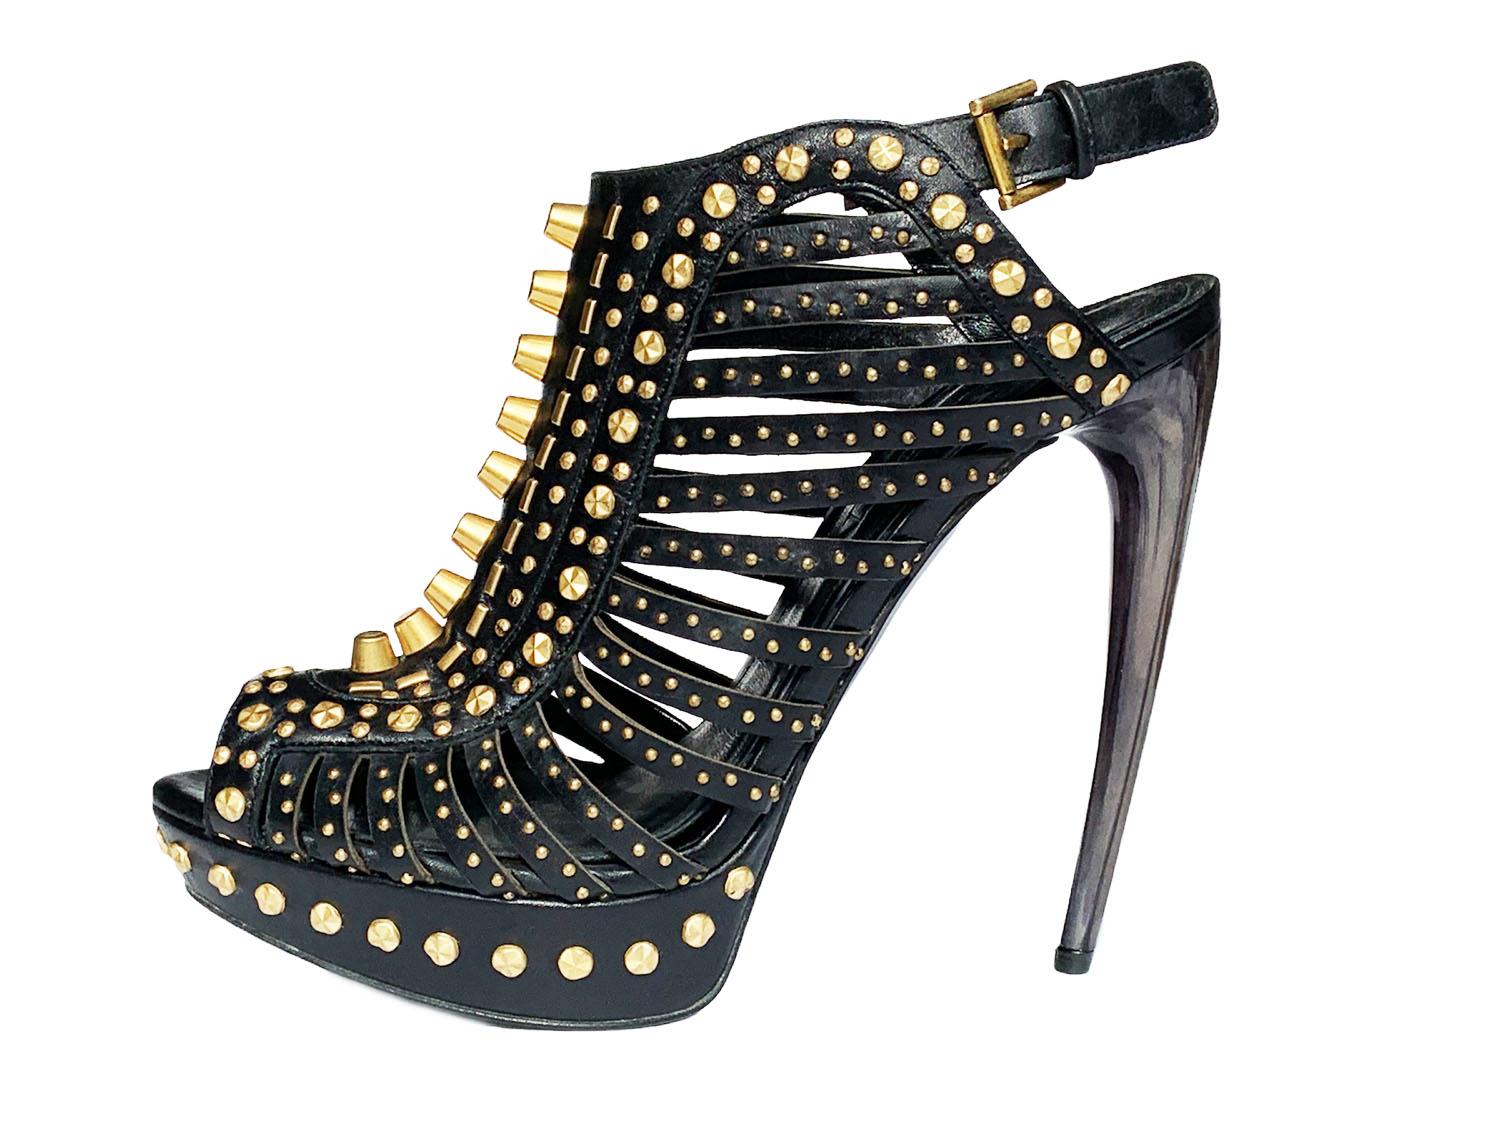 Alexander McQueen Black Leather Studded Cage Platform Sandals
S/S 2012 Collection
Italian size - 38.5 ( US 8.5)
The perfect amount of luxury, elegance, strength and severity. Adorned with gold-tone hardware, a concave stiletto horn heel, enough